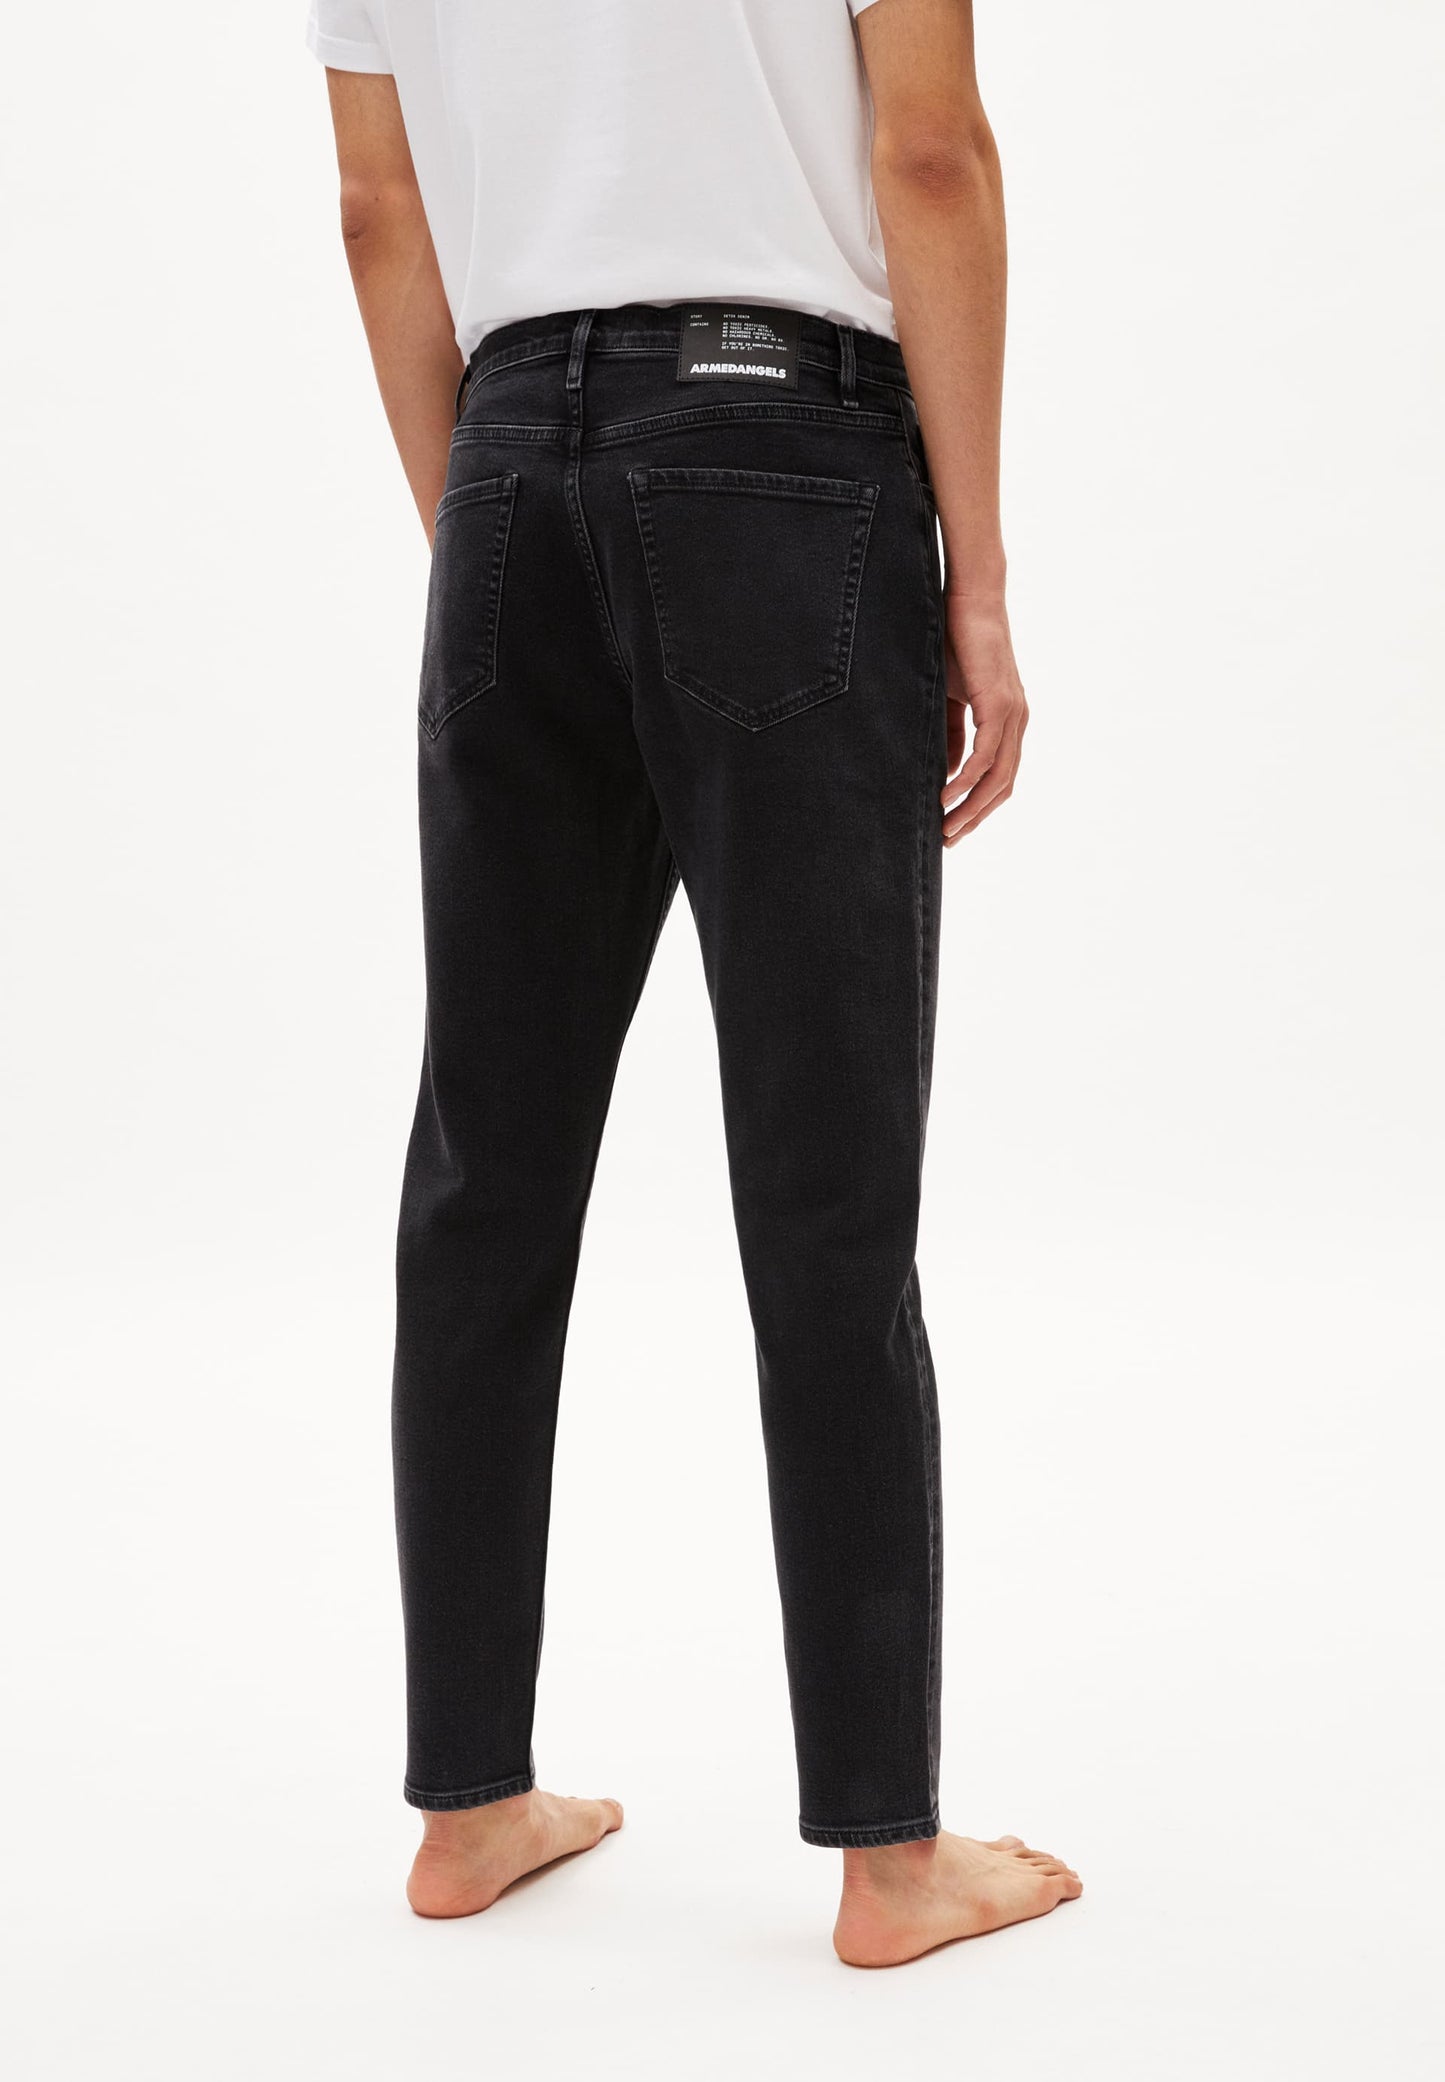 
                  
                    AARJO Black Washed Authentic Regular Fit Jeans
                  
                